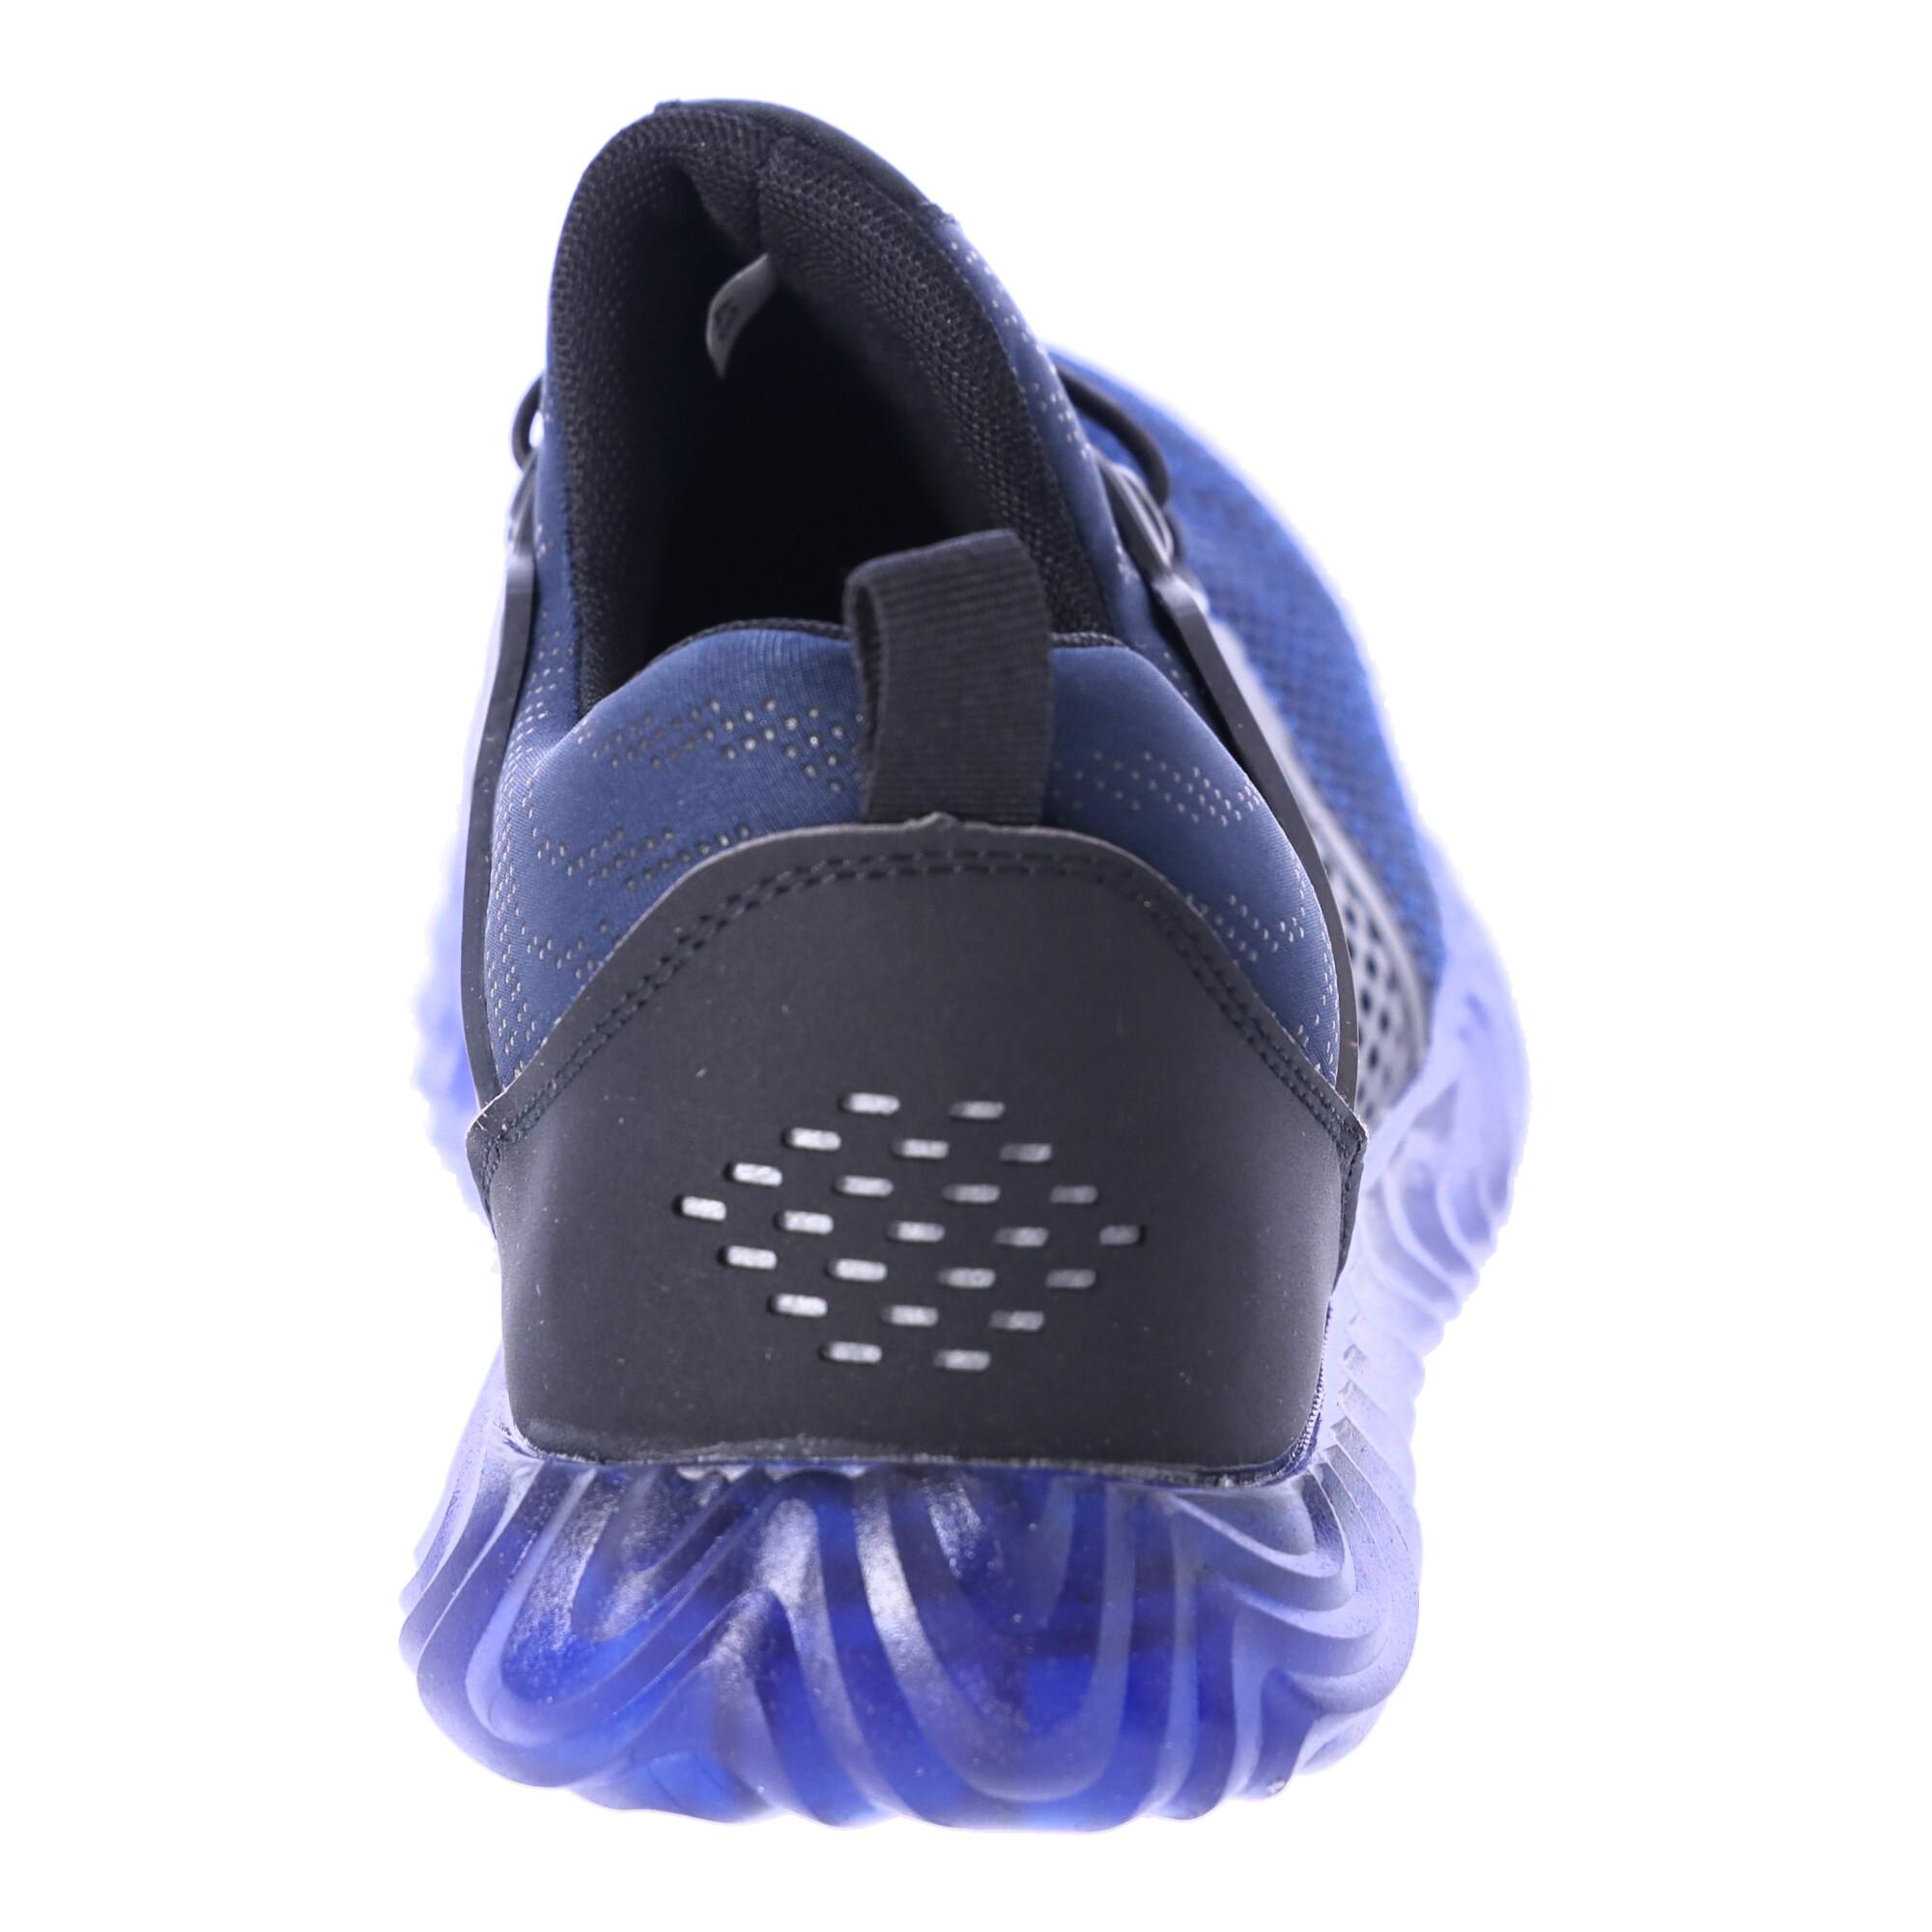 Work safety shoes "43" - navy blue